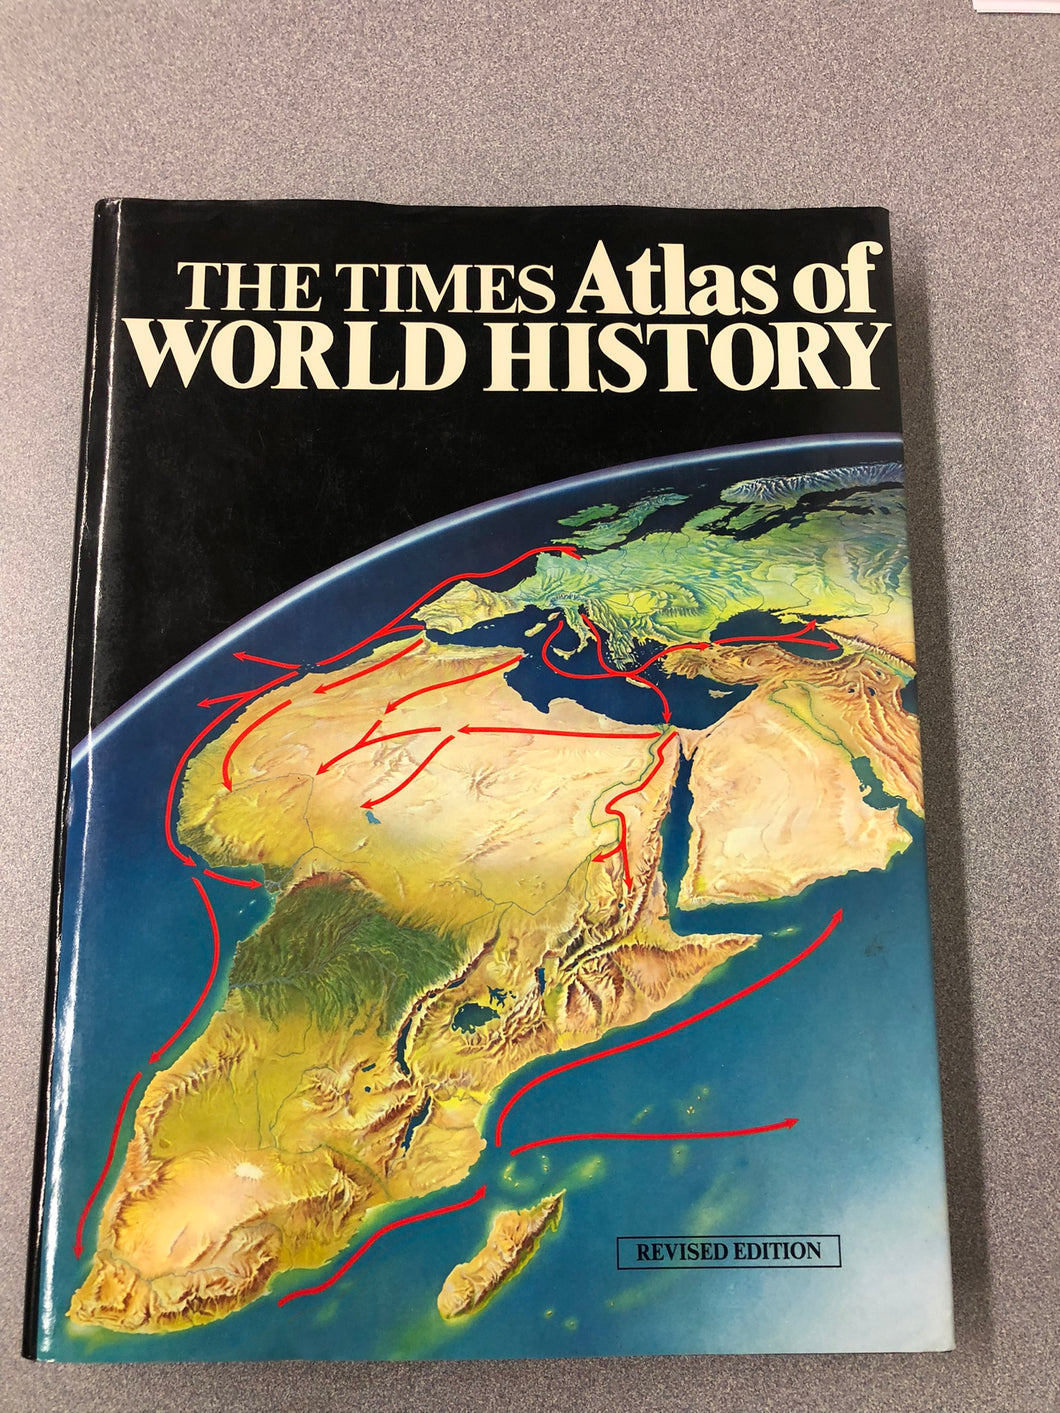 The Times Atlas of World History, Revised Edition, Barraclough, Geoffrey, ed, [1984] H 7/22